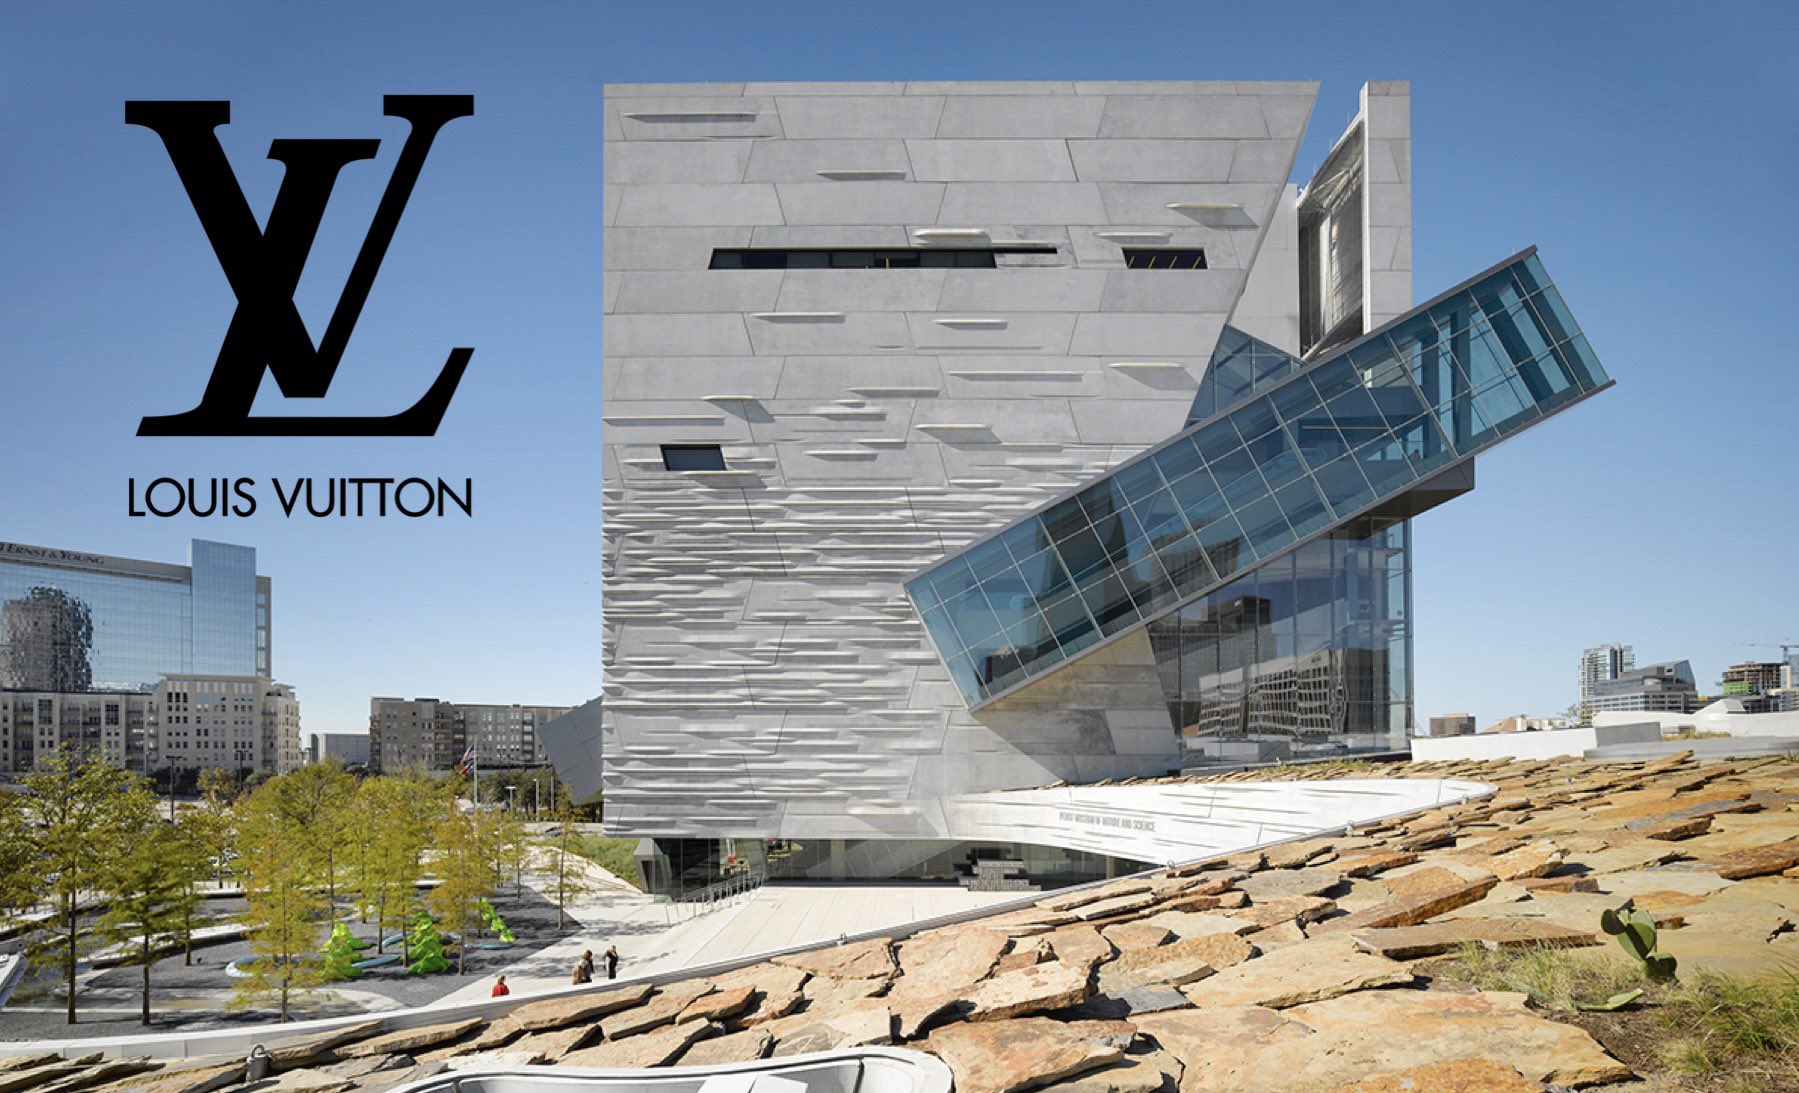 Louis Vuitton Cruises into 2023 at the Perot Museum